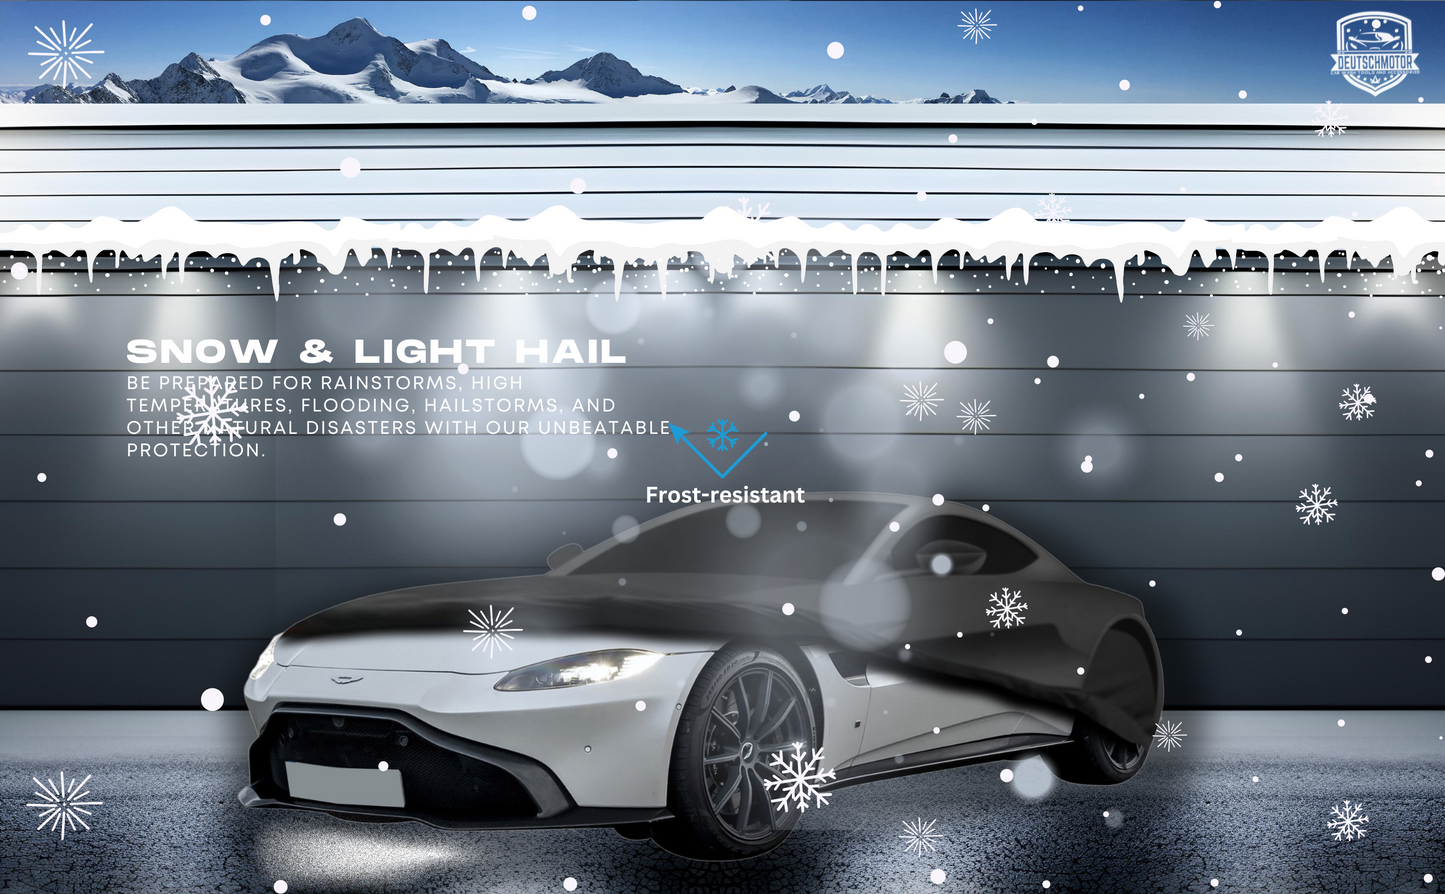 Weather Car cover for Aston Martin Vanquish dust repellent dust rain hail snow protection